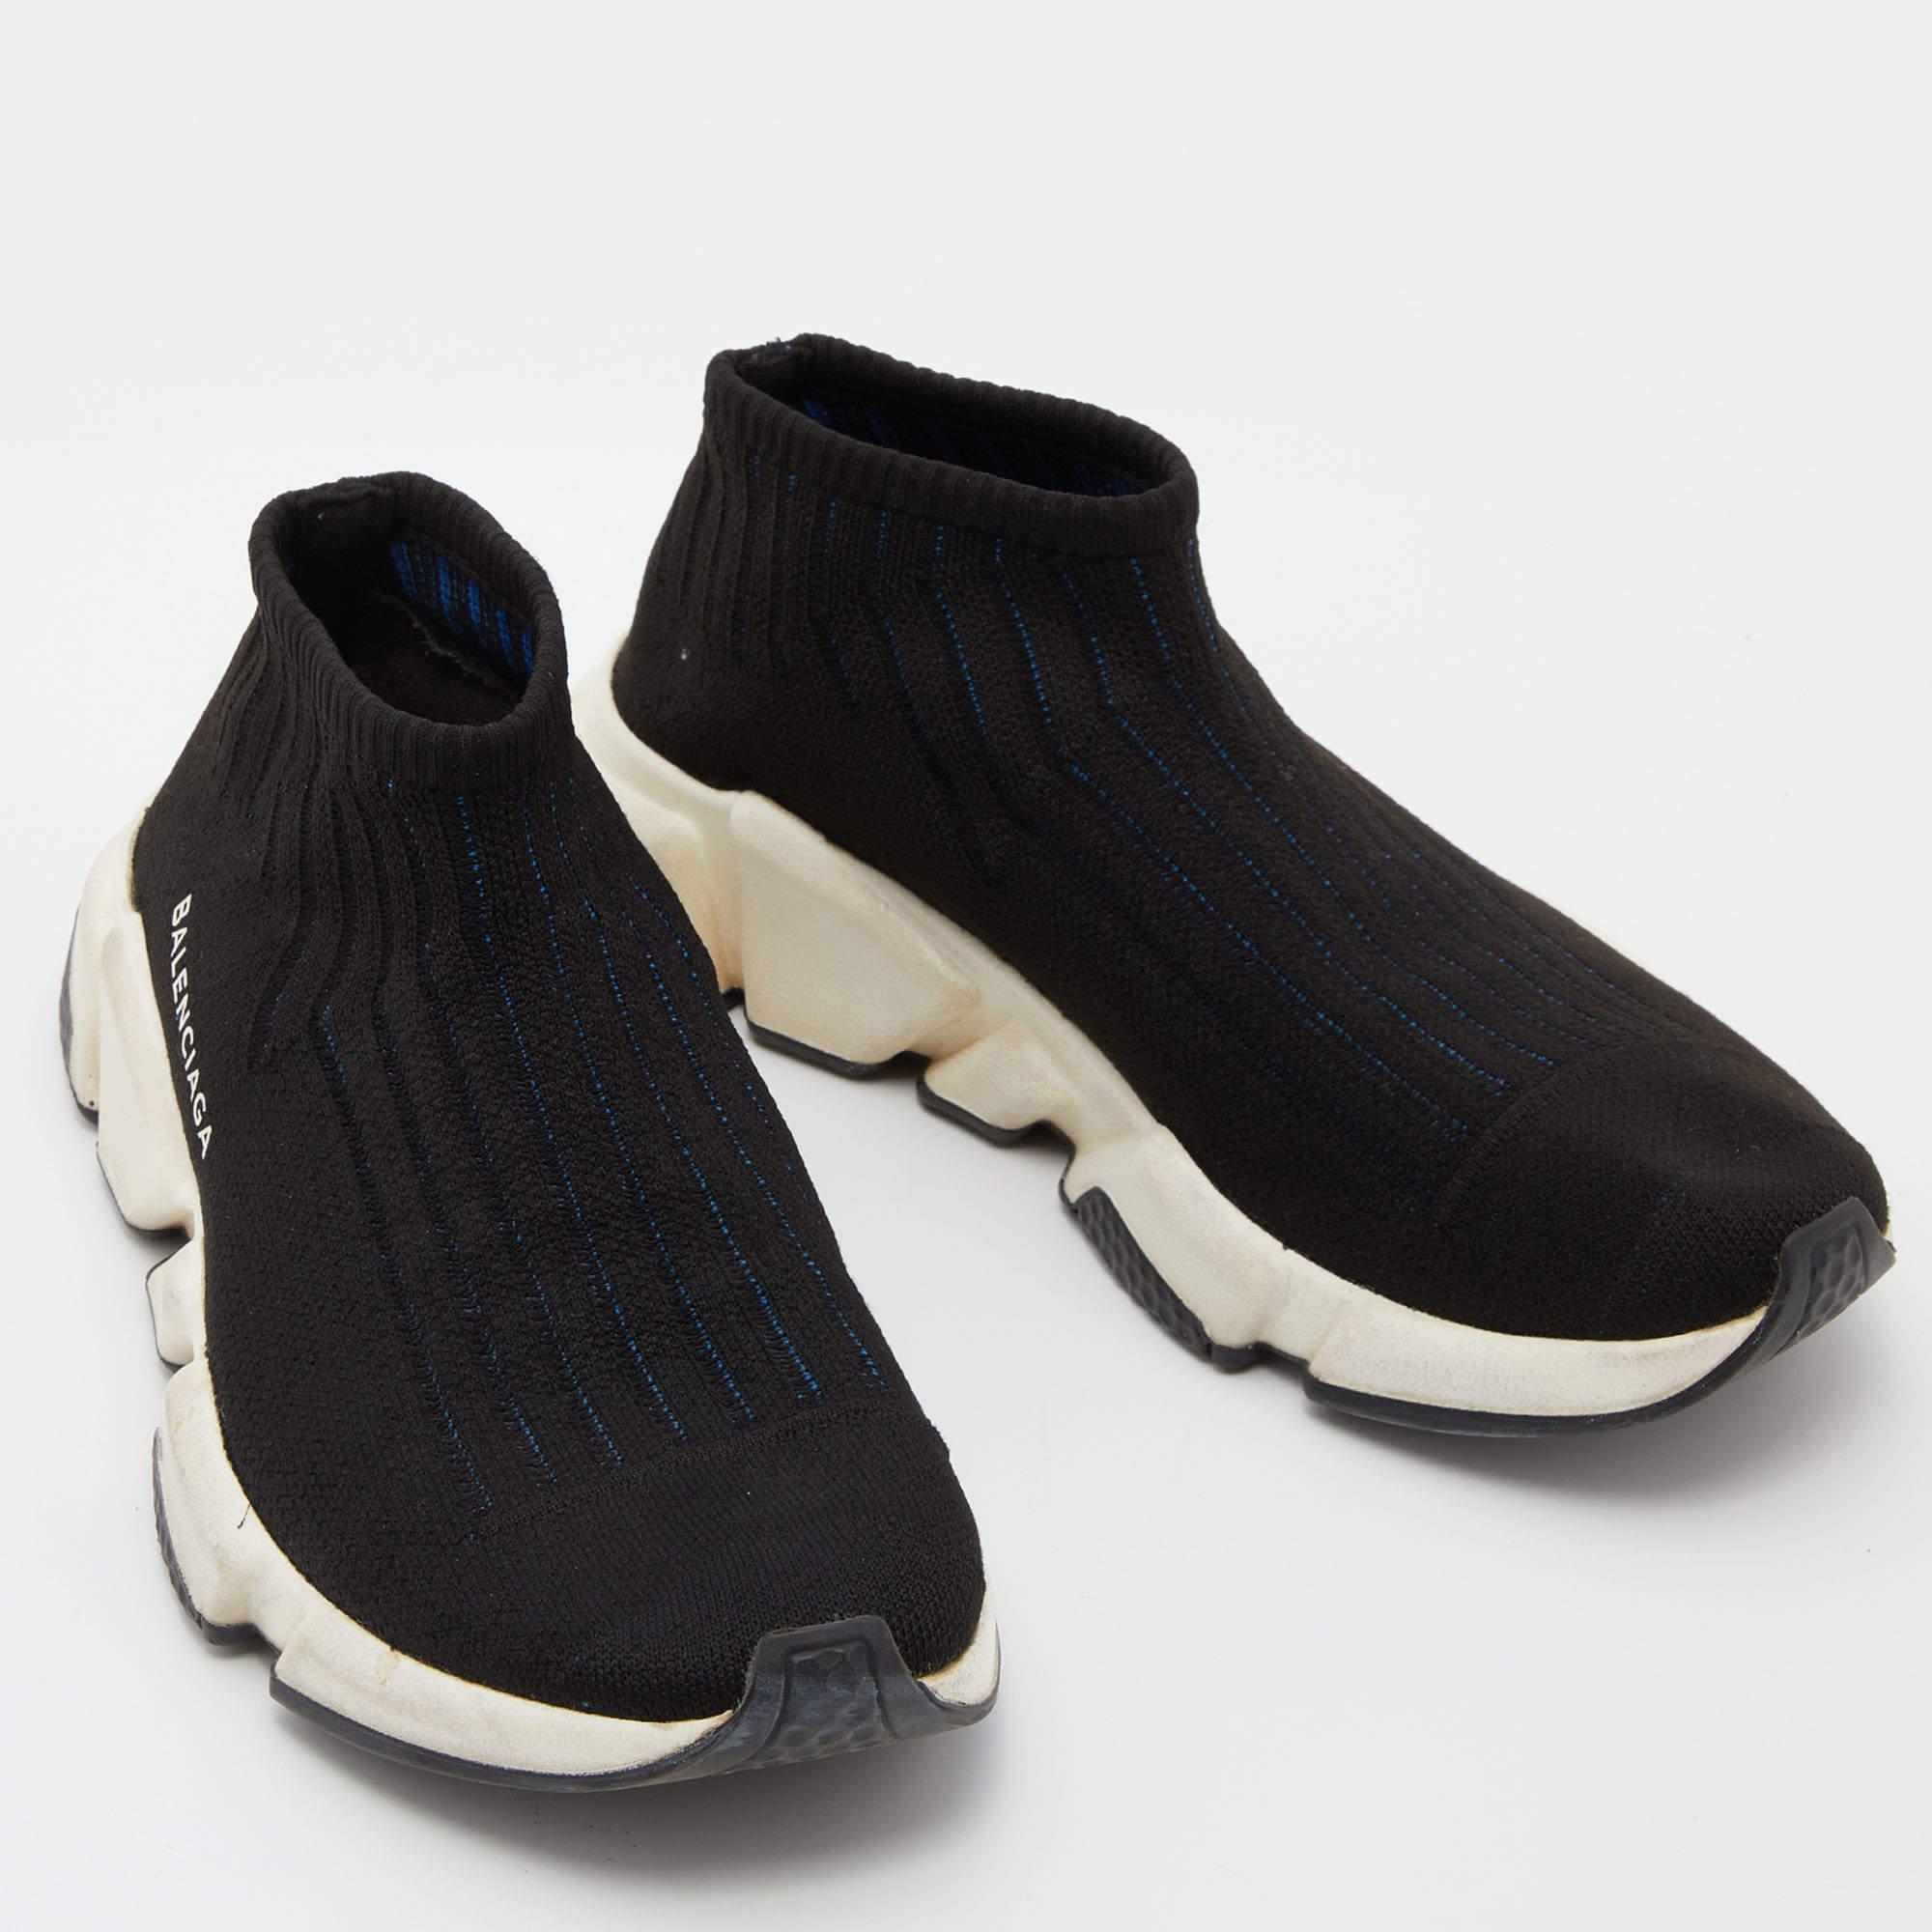 Balenciaga Black Knit Speed Trainer Slip On Sneakers Size 39 1